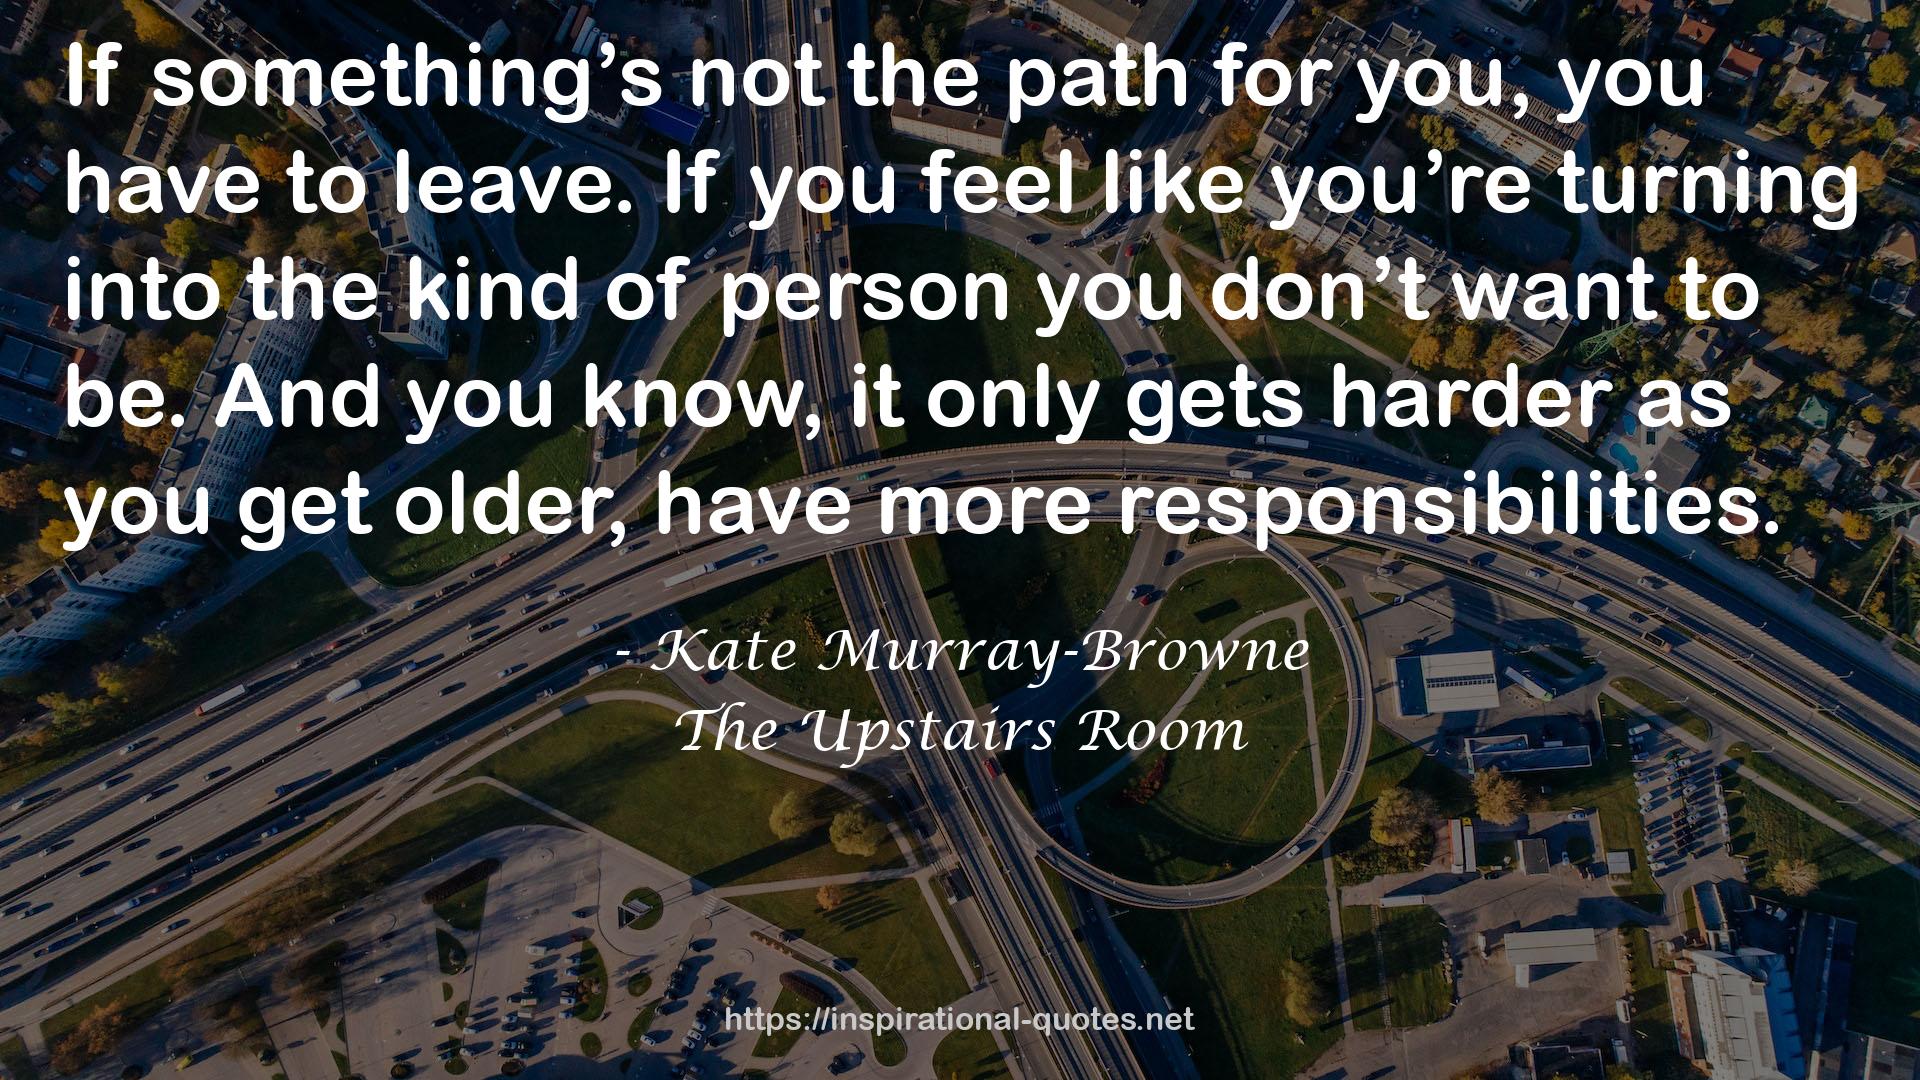 Kate Murray-Browne QUOTES